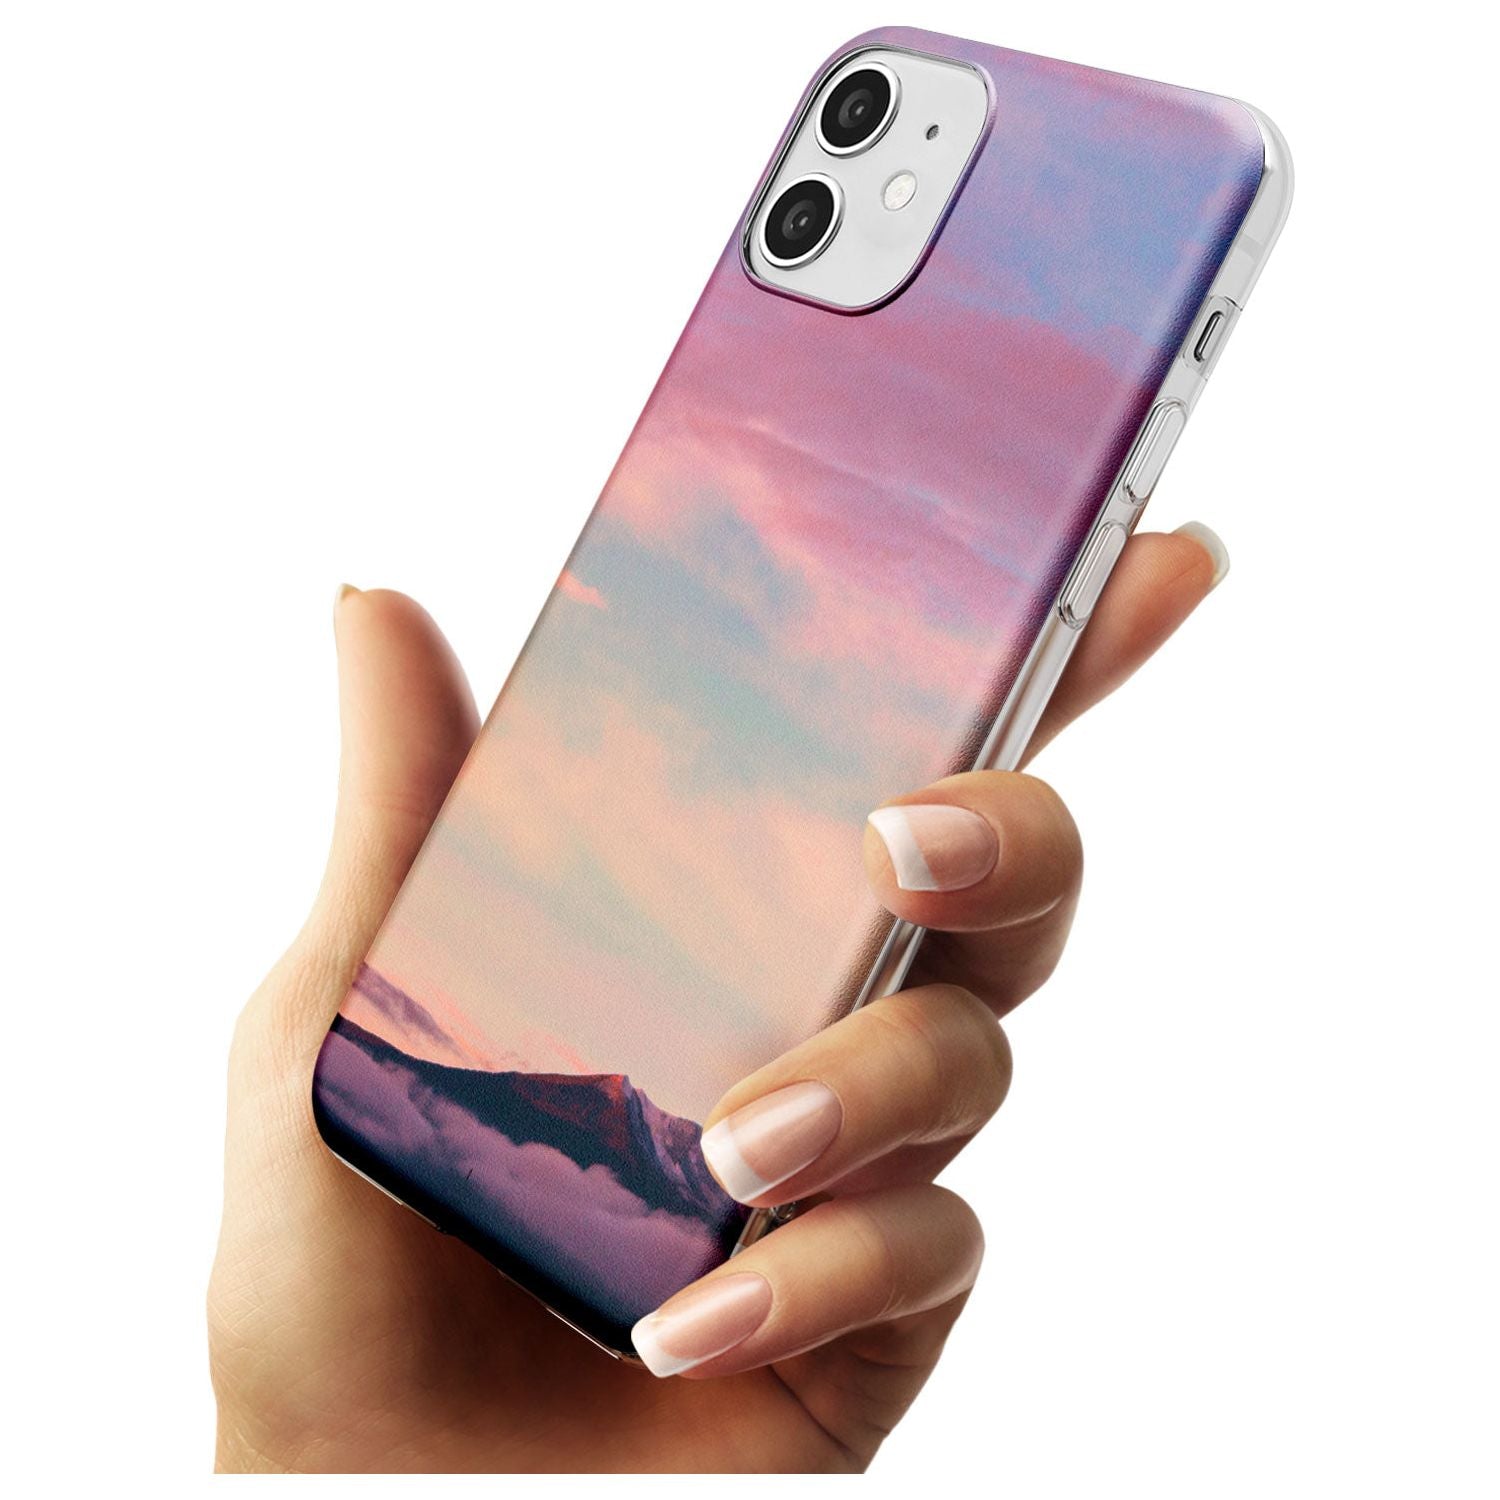 Cloudy Sunset Photograph Slim TPU Phone Case for iPhone 11